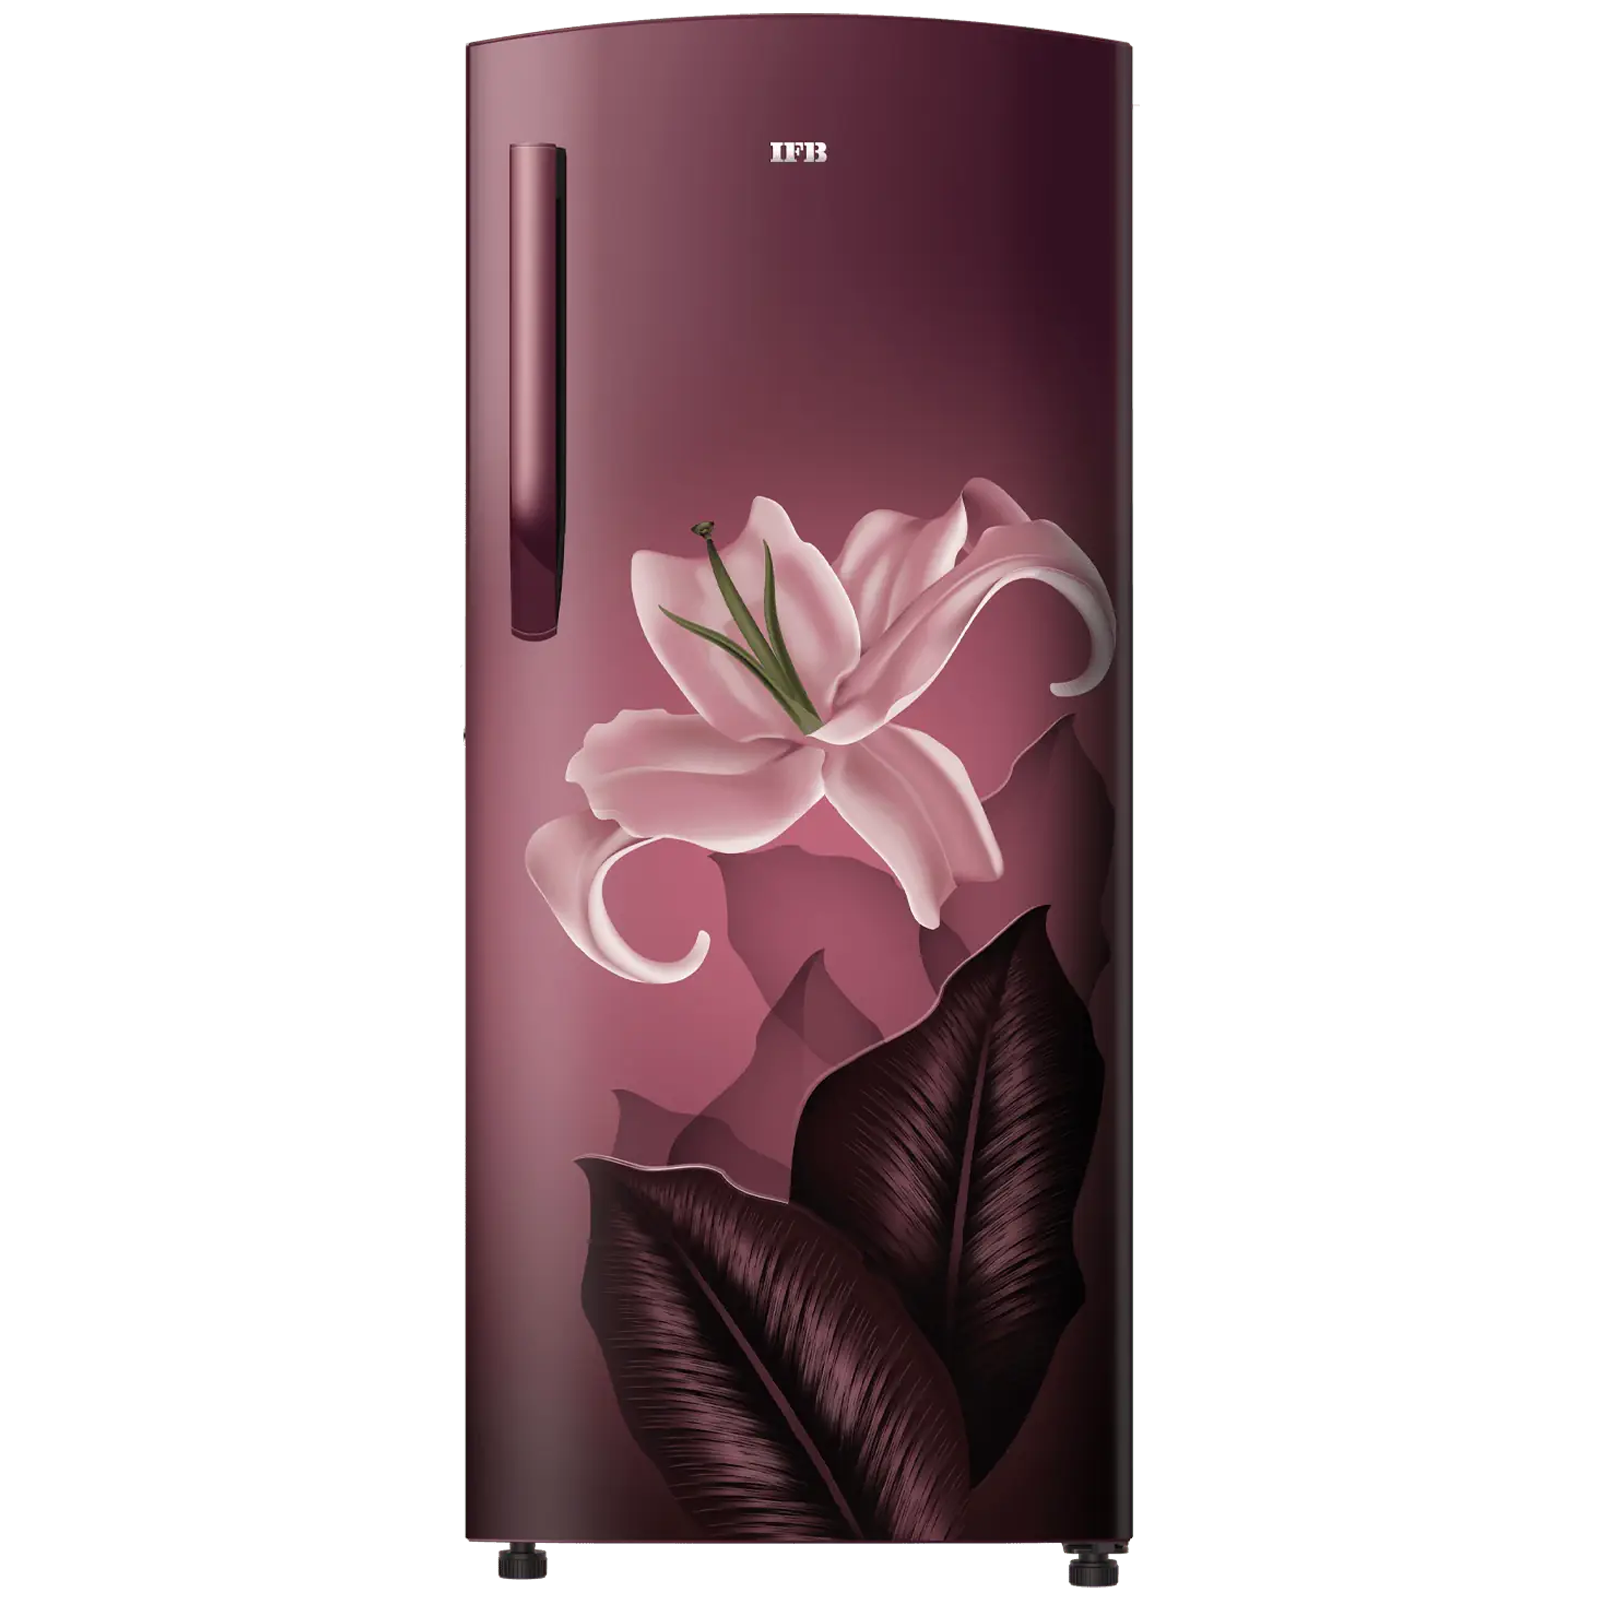 IFB Advance Cool 212 Litres 5 Star Direct Cool Single Door Refrigerator with Antibacterial Gasket (IFBDC2325IRB, Midnight Bloom Red)